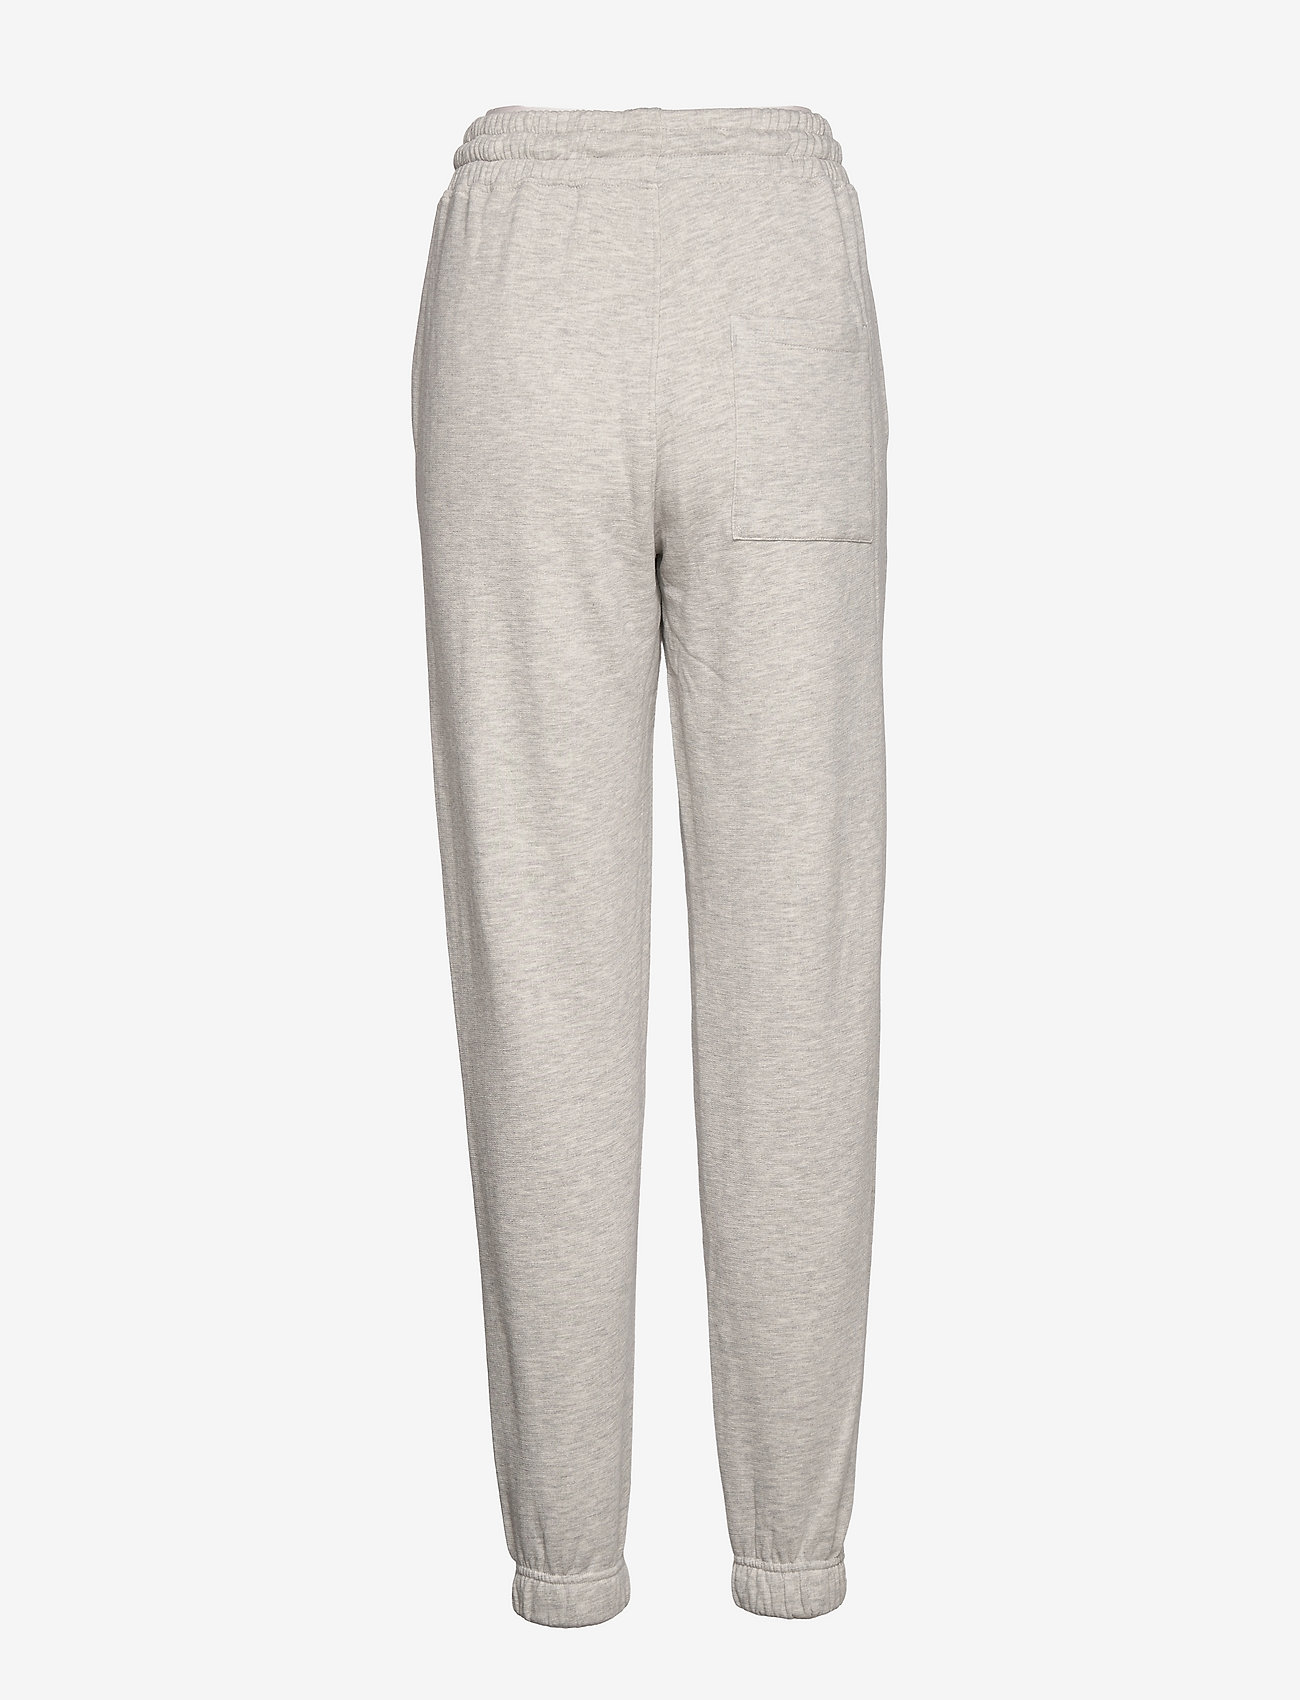 Hanger by Holzweiler - Hanger Trousers - sweatpants - grey mix - 1